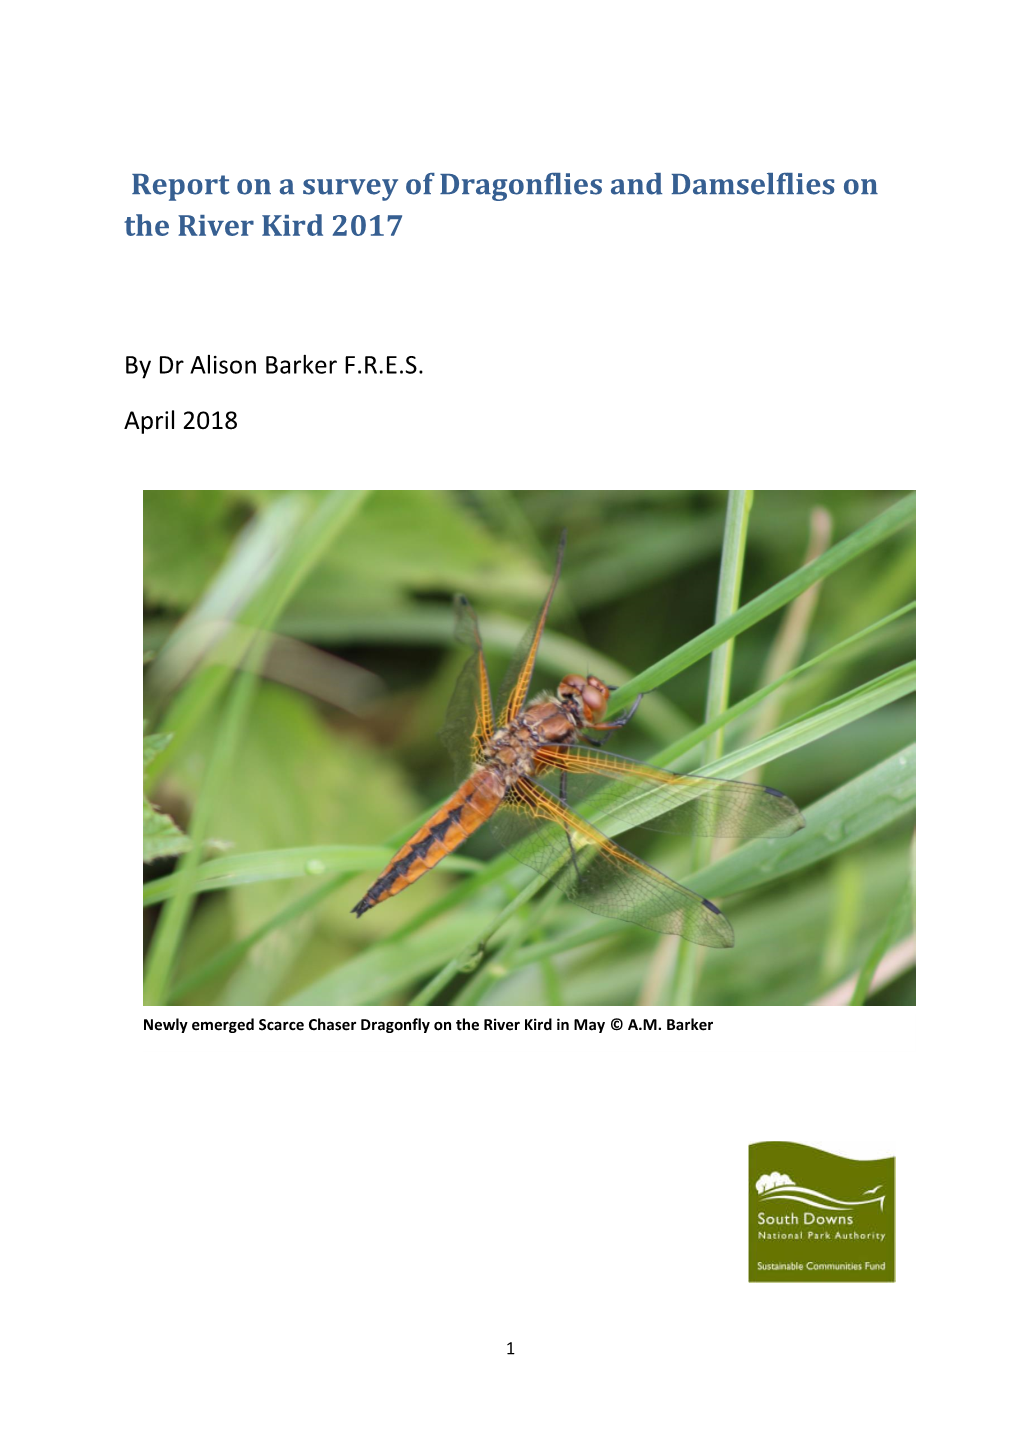 Report on a Survey of Dragonflies and Damselflies on the River Kird 2017